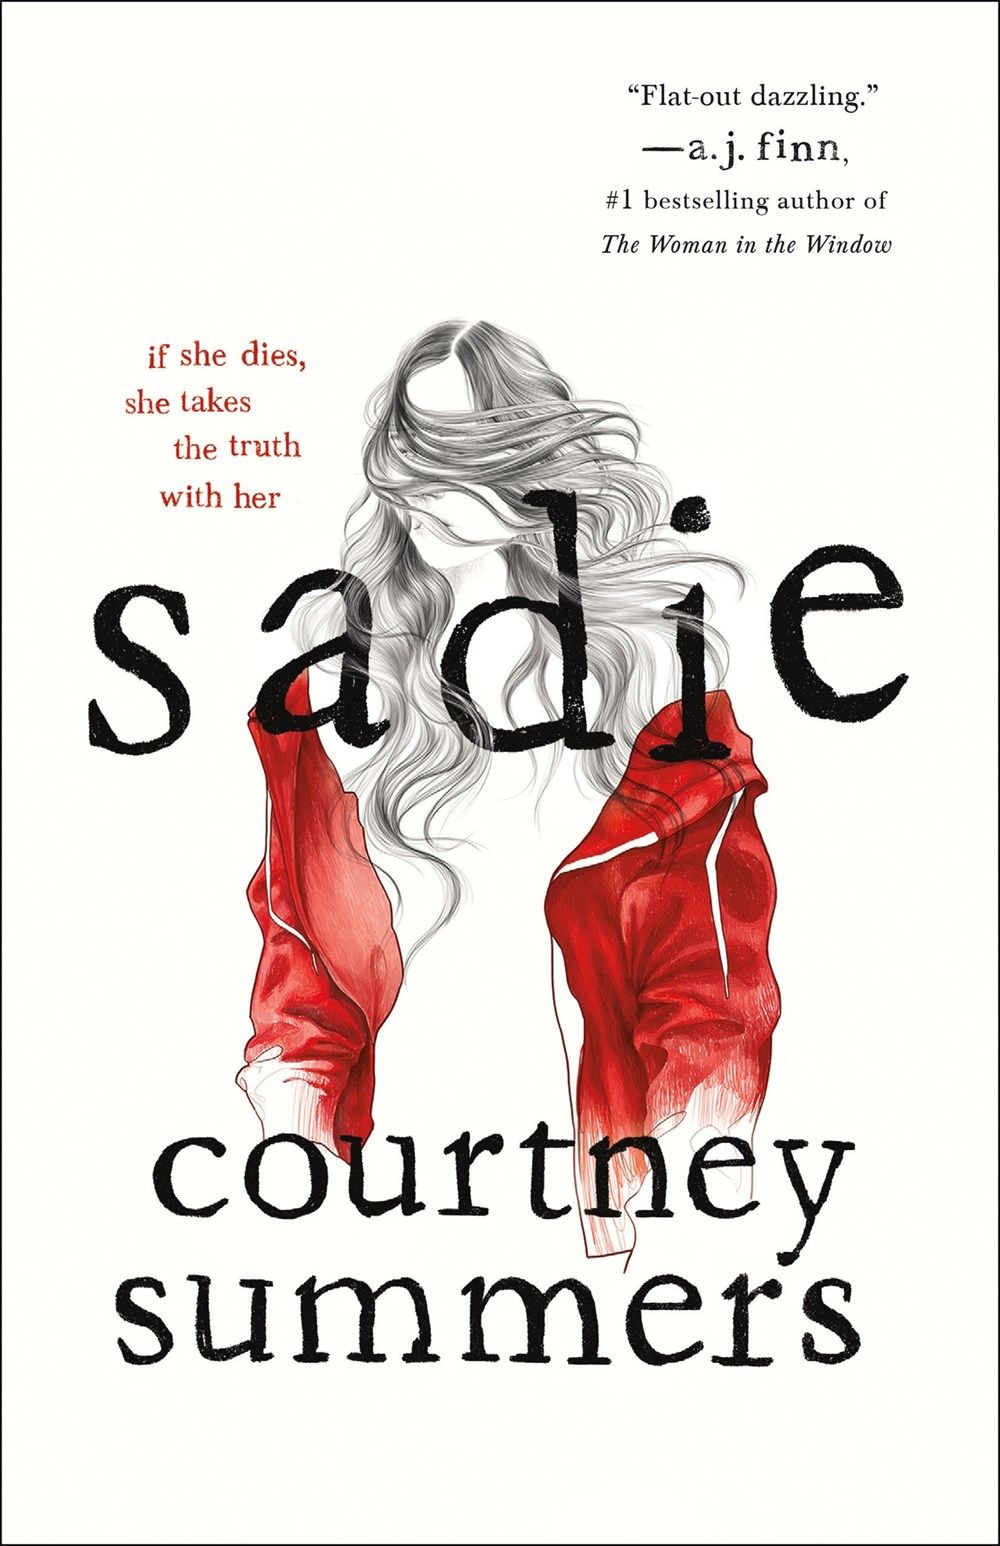 Book cover by Sadie by Courtney Summers